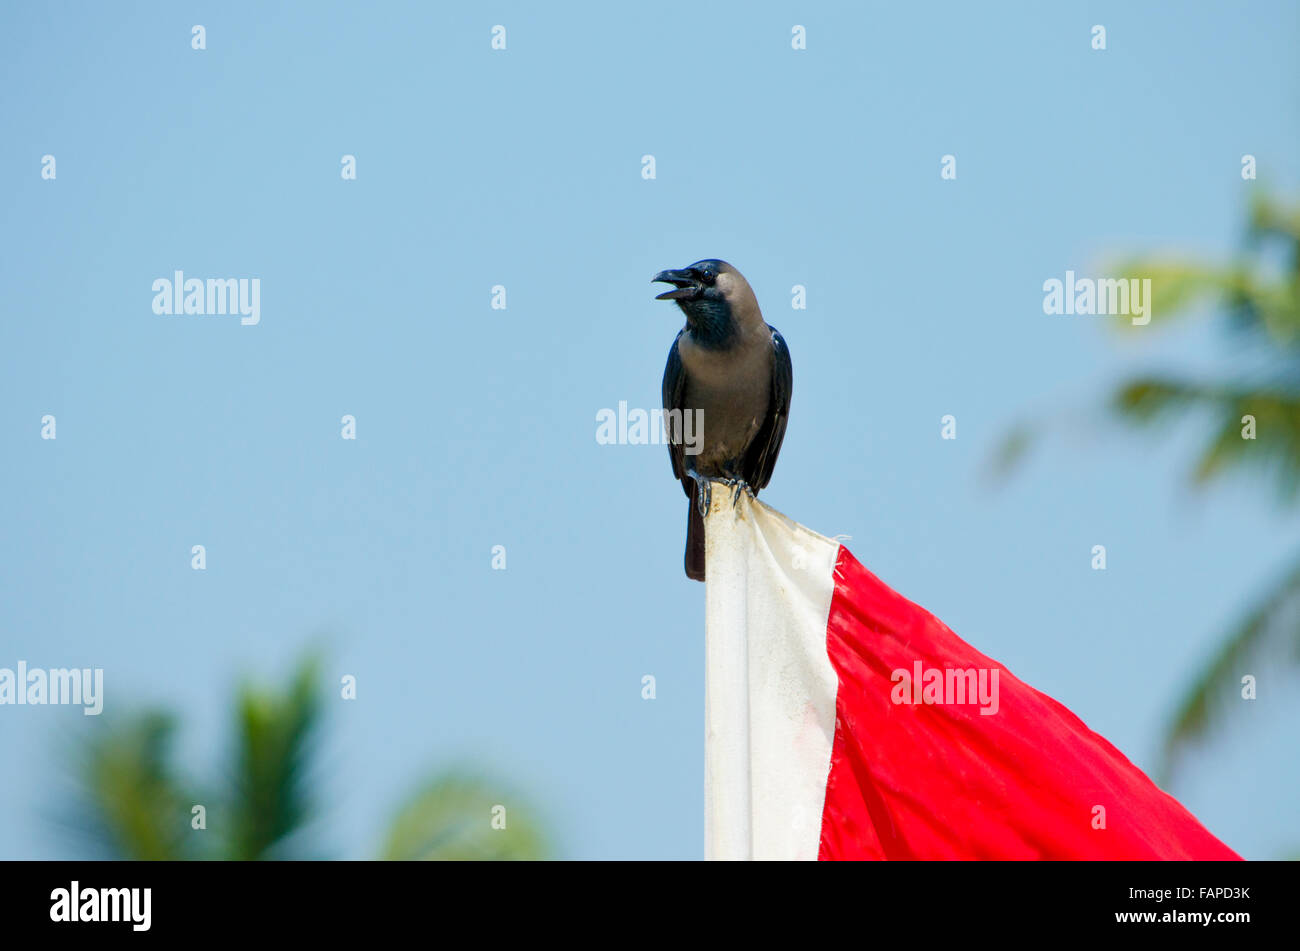 bird of a raven black sits on a flag staff,the bird,a crow,black,sits,against the blue sky,an open mouth,birds of asia,fauna Stock Photo